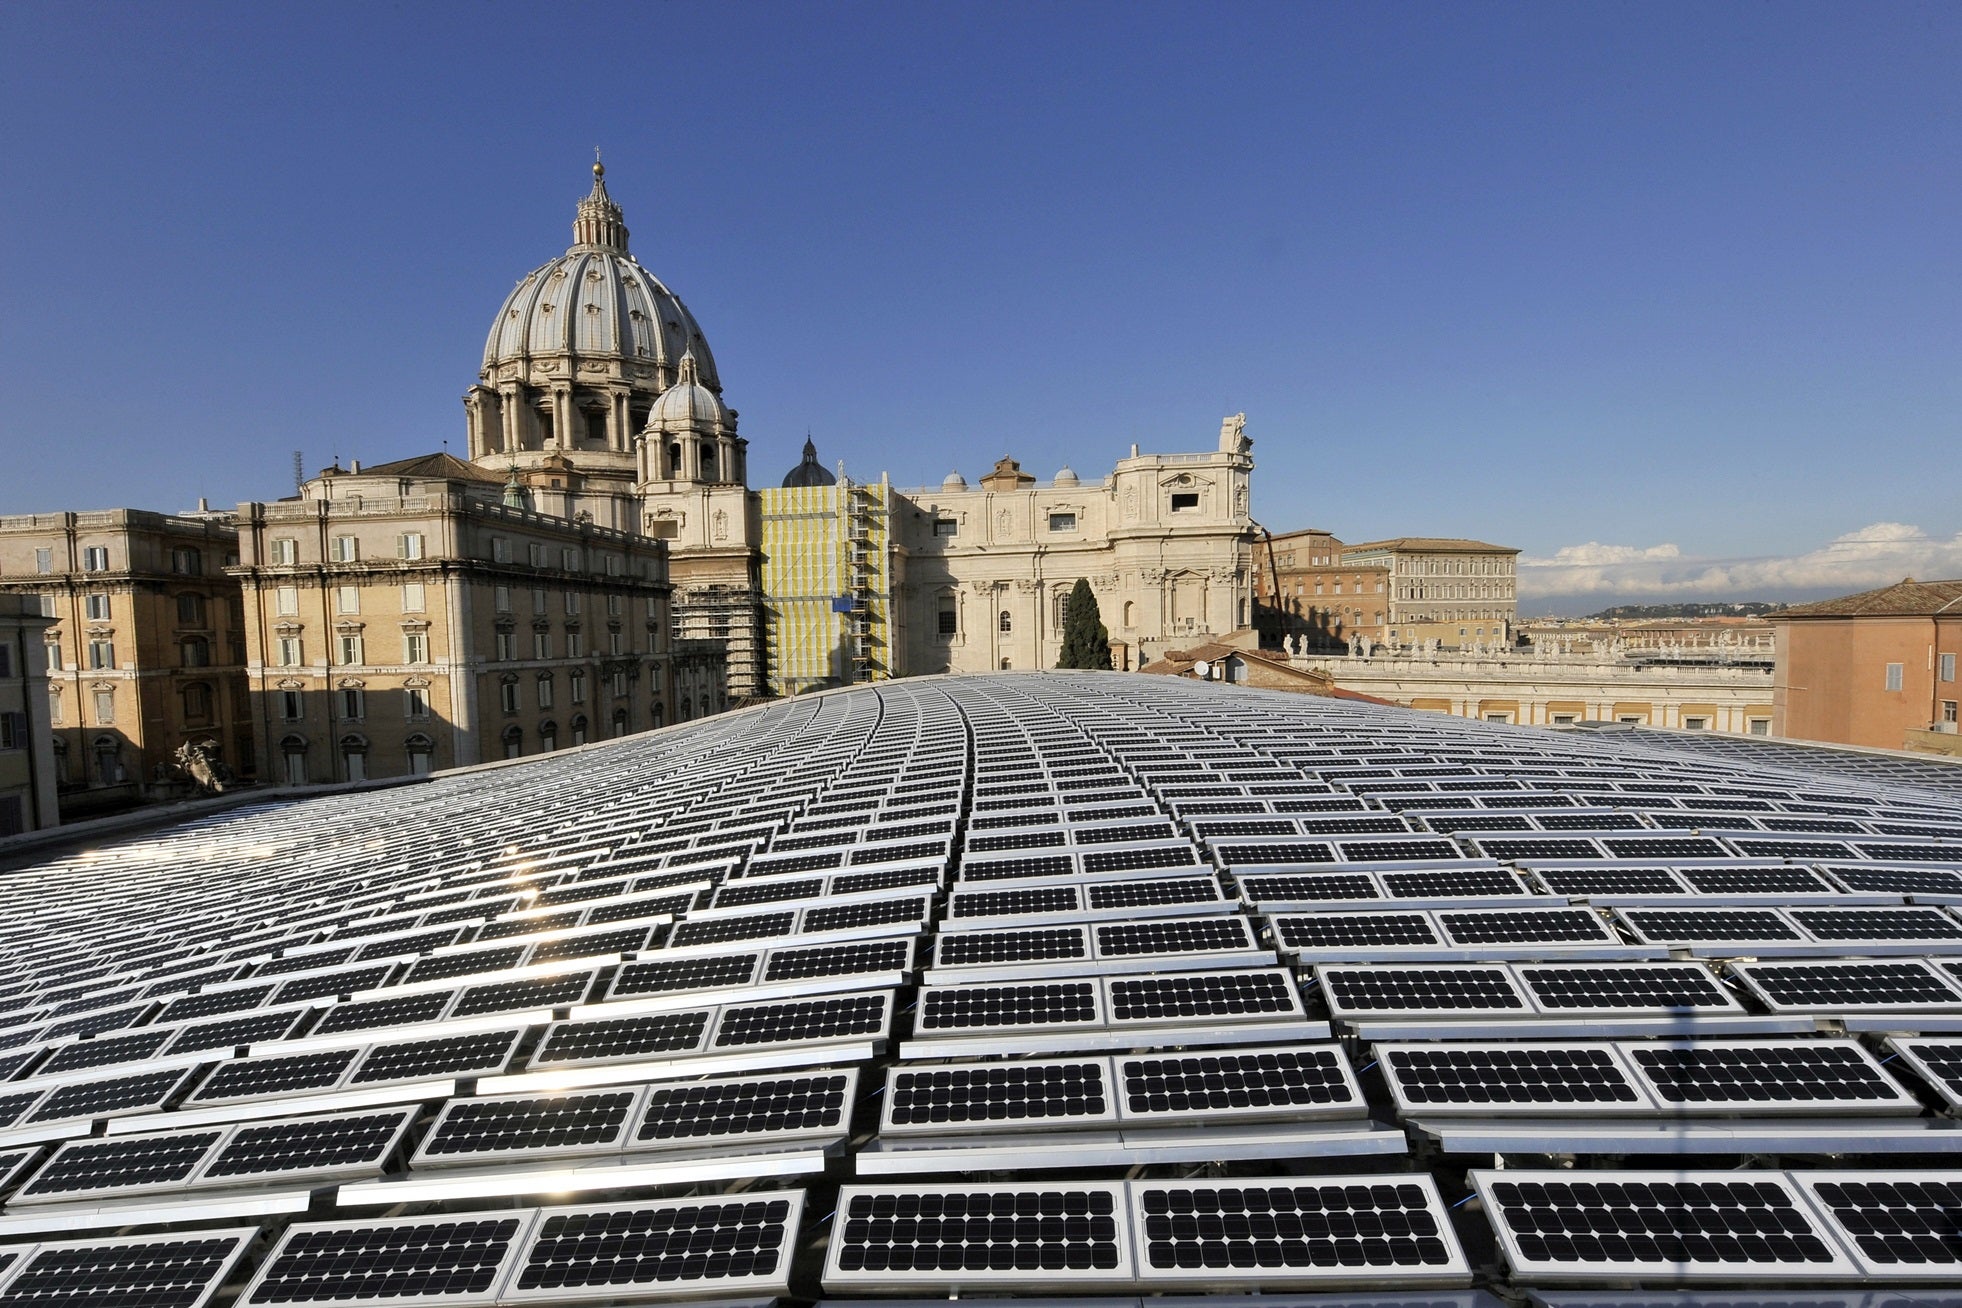 Solar panels covering the roof of the Paul VI audience hall at the Vatican with the Basilica of Saint Peter in the background on 26 November, 2008